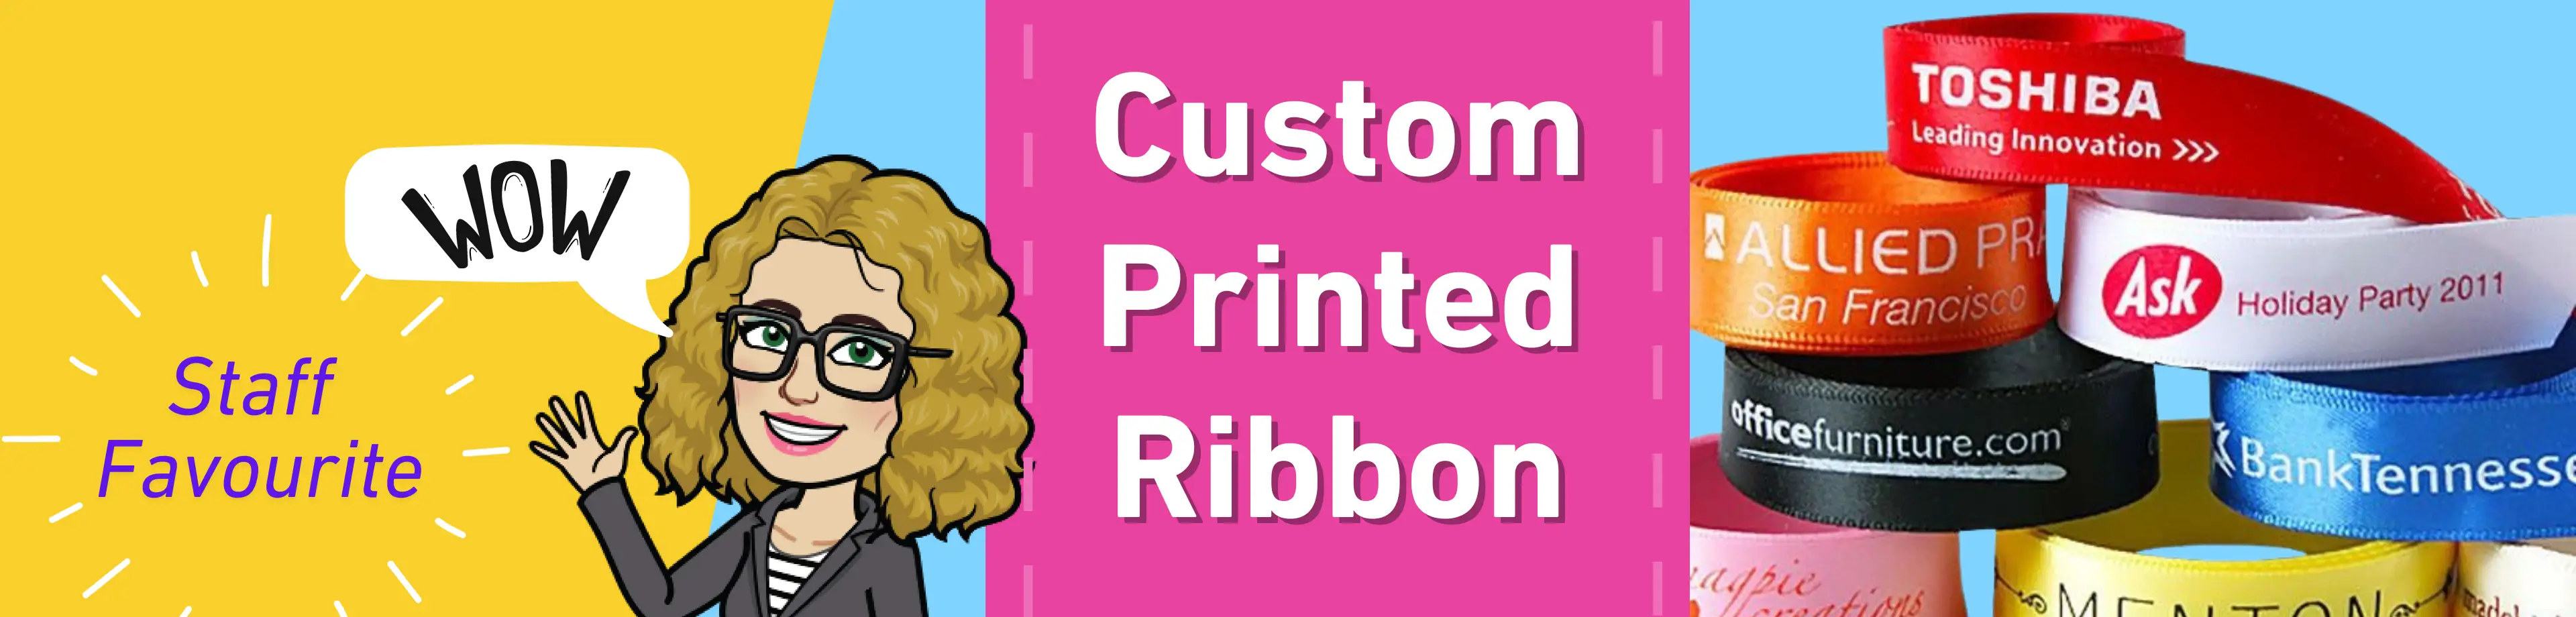 Custom Printed Ribbon - Add a professional and personal touch to your branded business gifts in Canada!